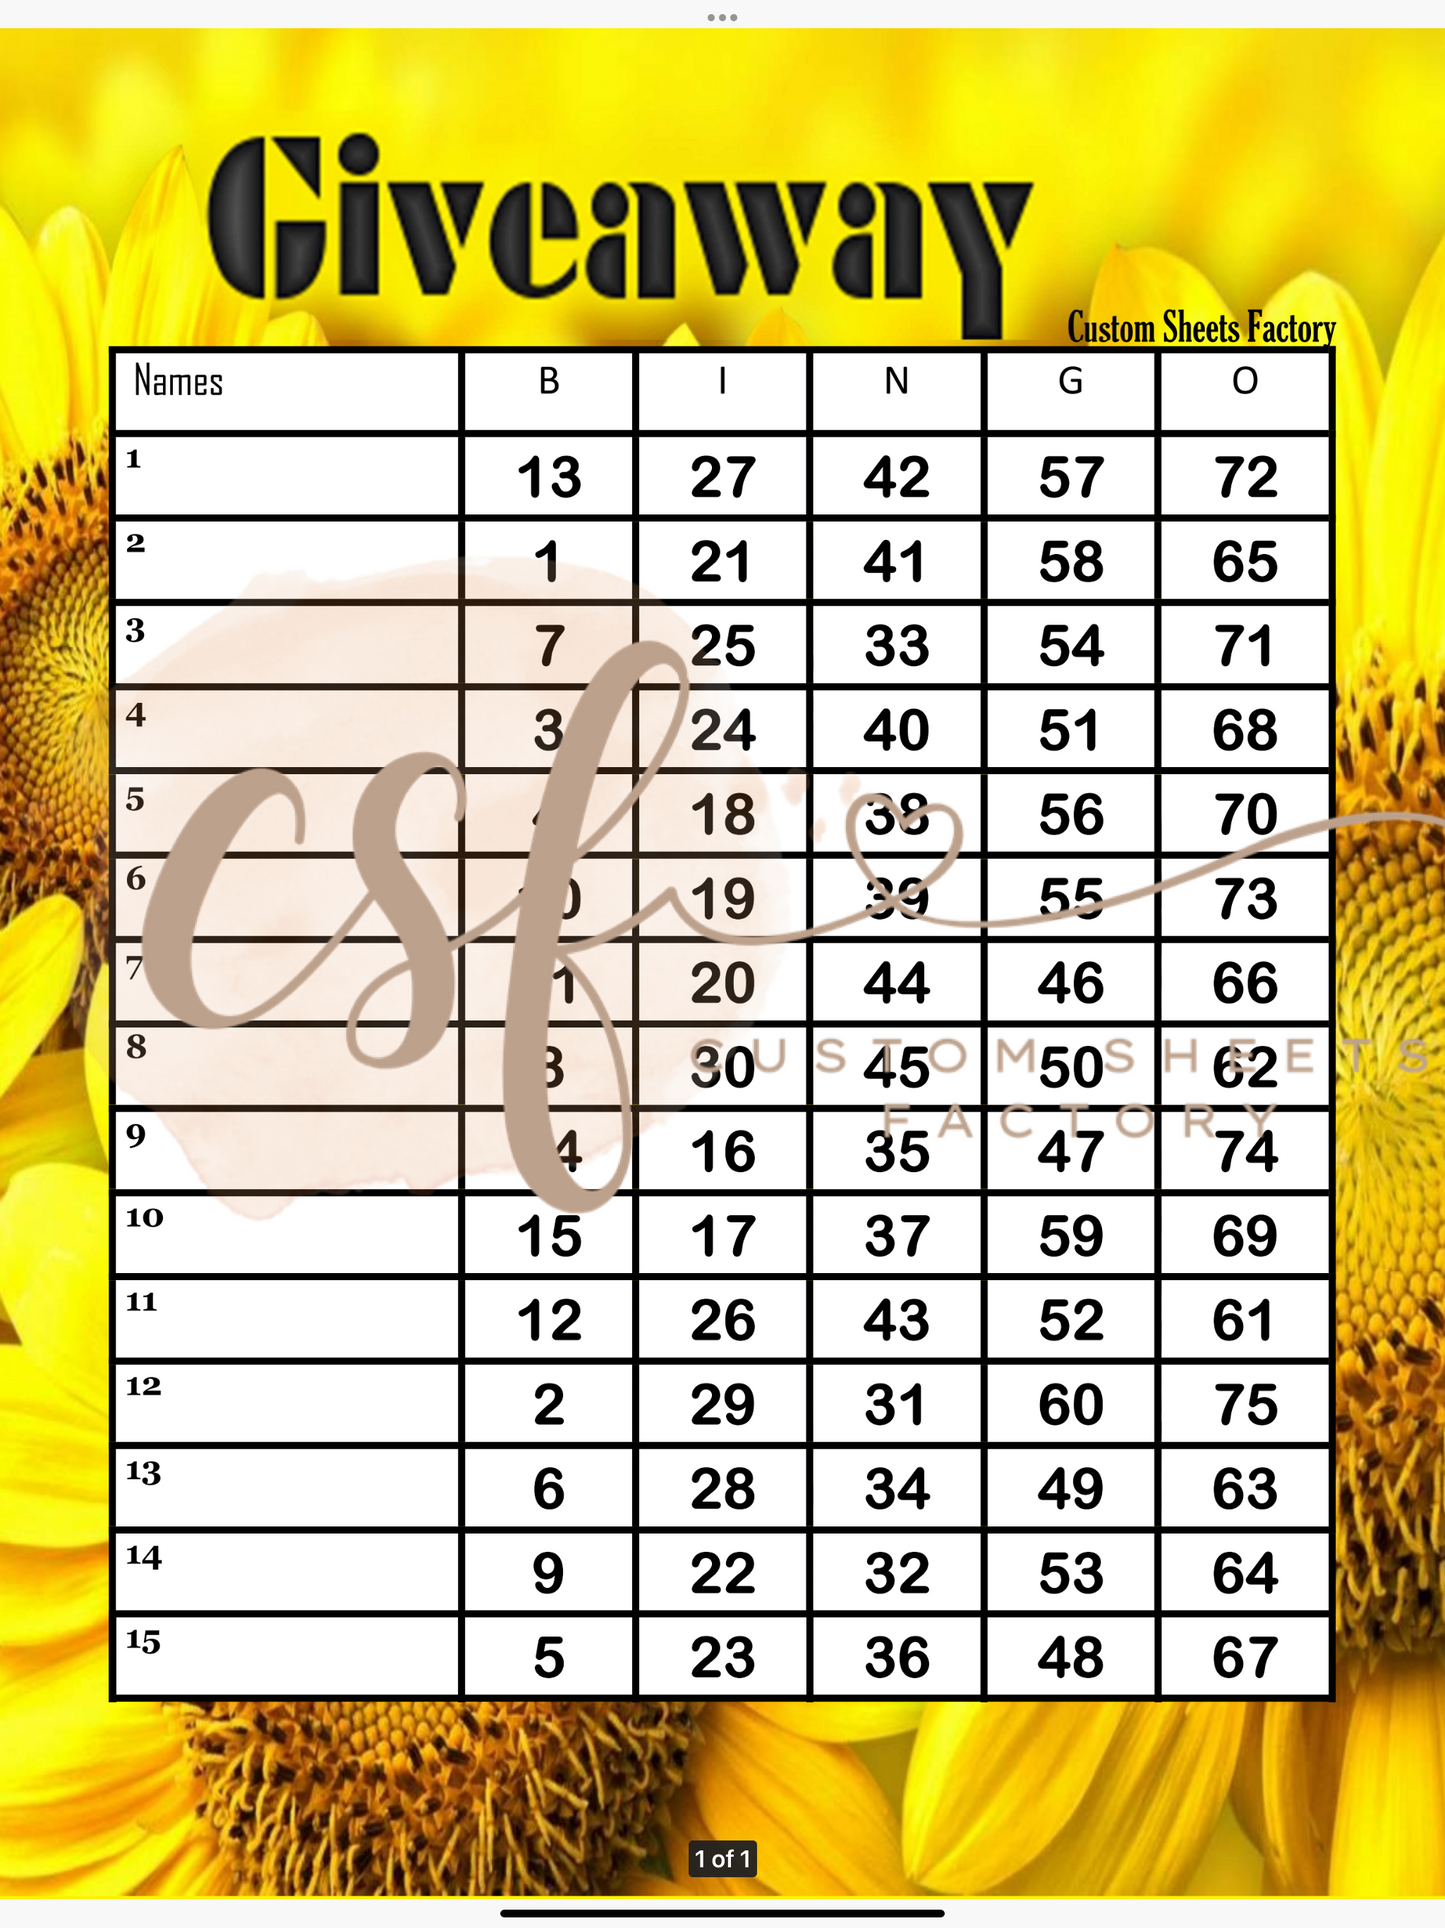 Sunflower Giveaway - 15 line - 75 ball